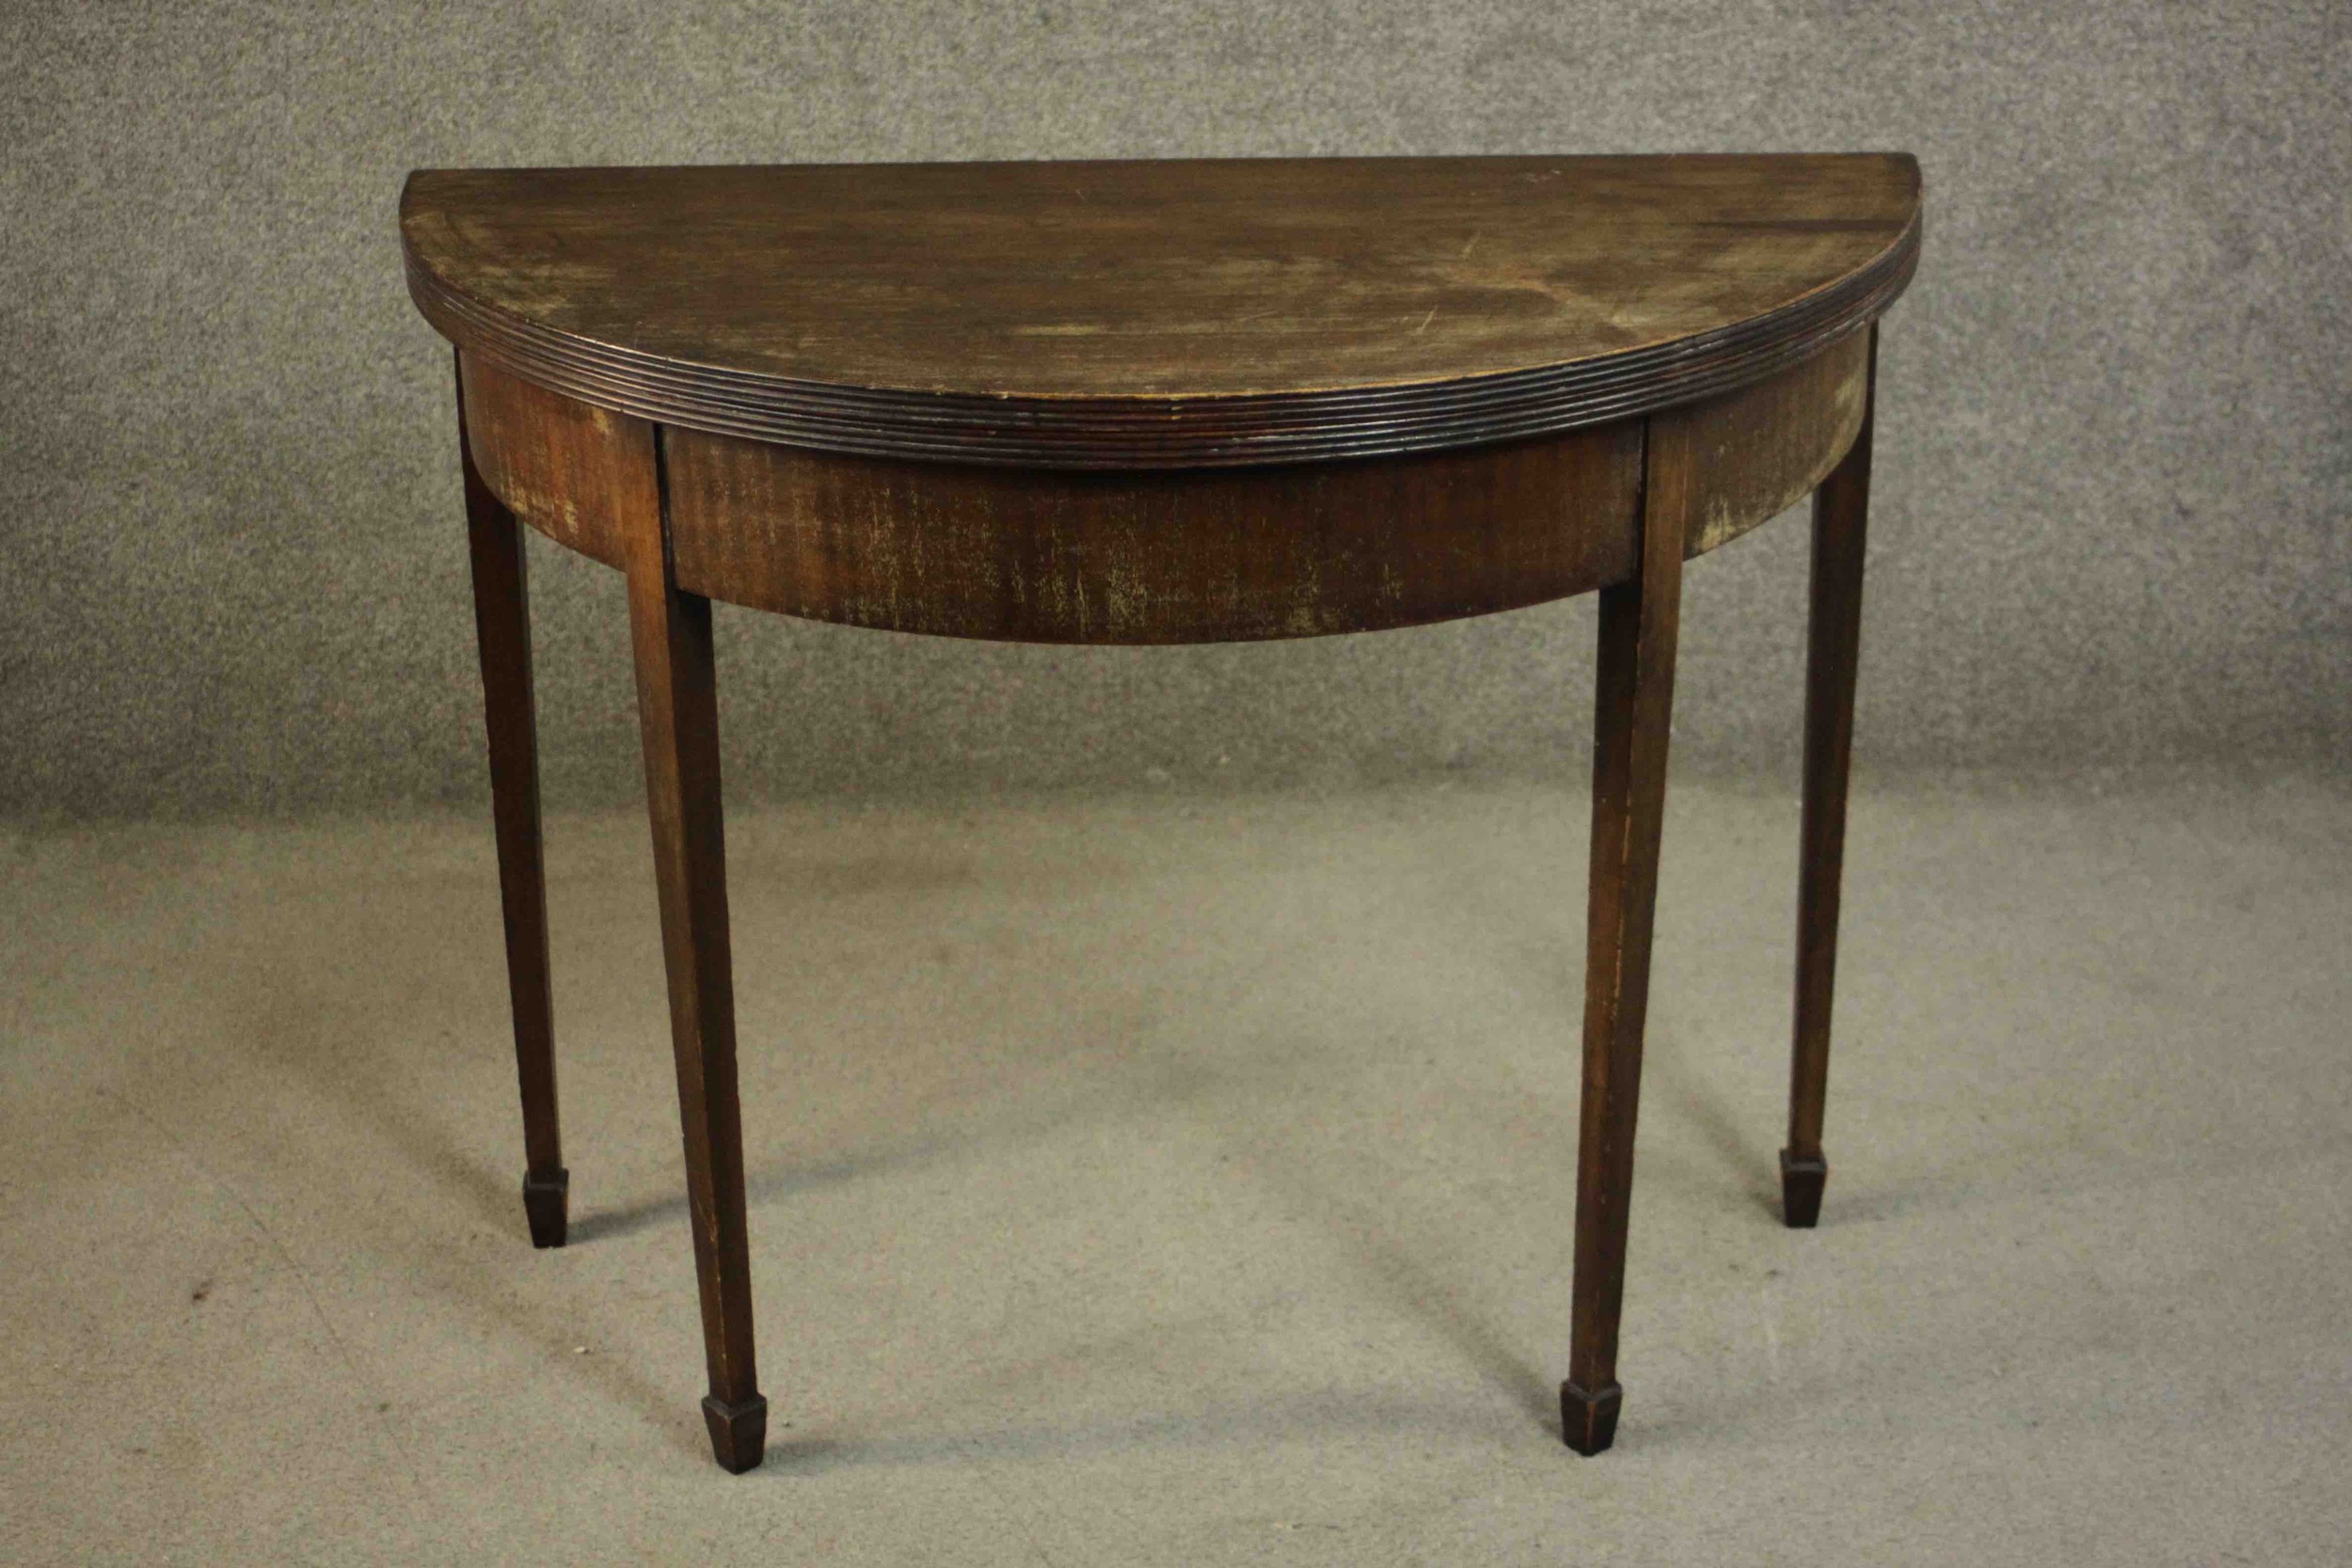 A George III mahogany demi-lune tea table, with a moulded edge and foldover top on square section